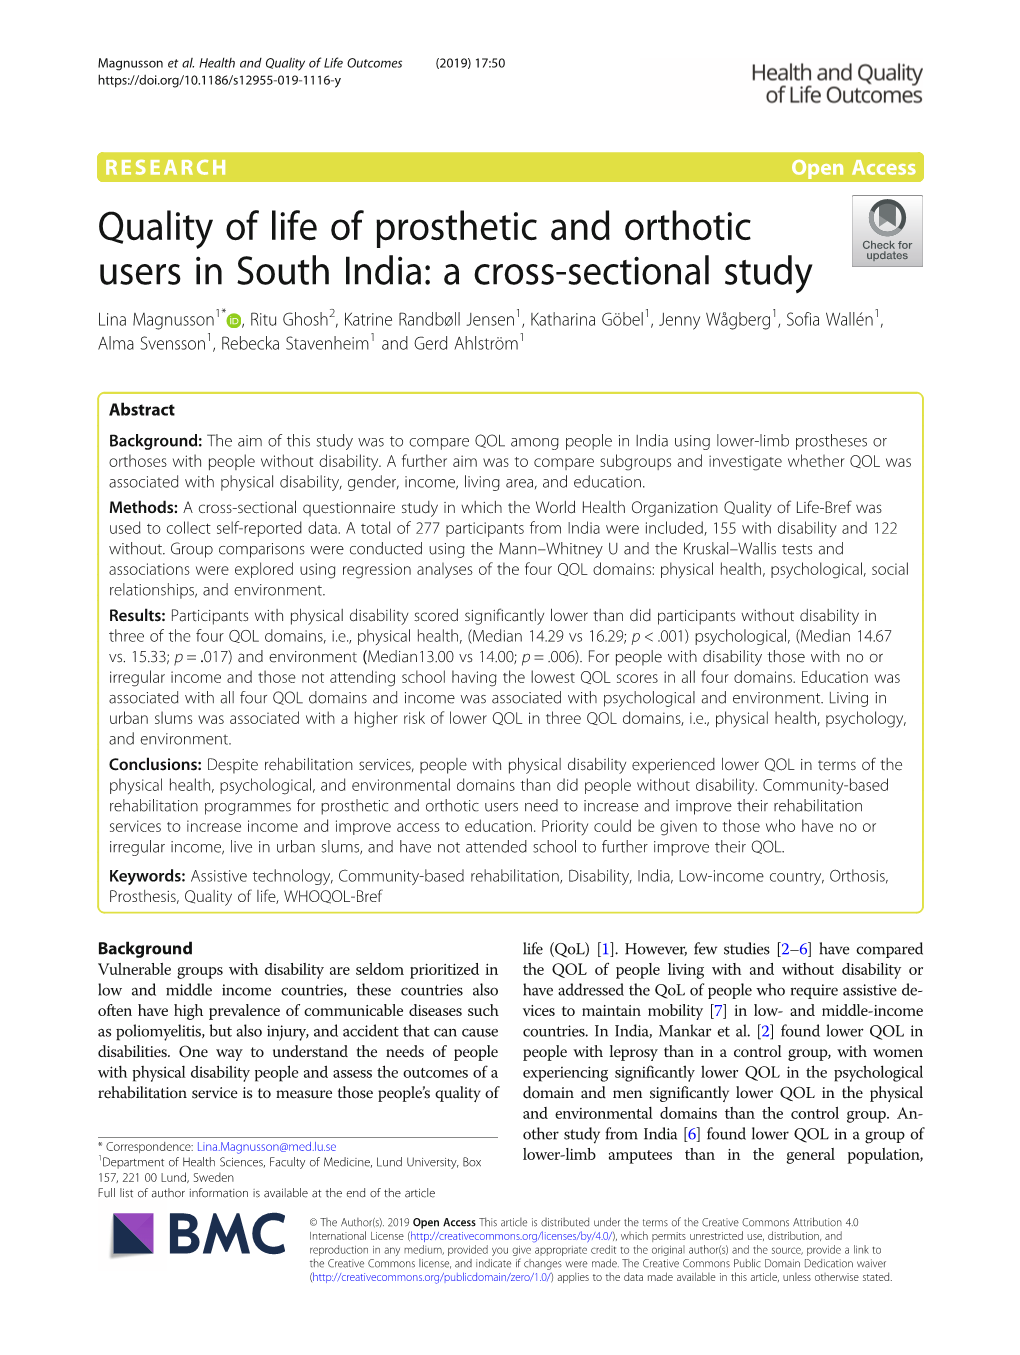 Quality of Life of Prosthetic and Orthotic Users in South India: a Cross